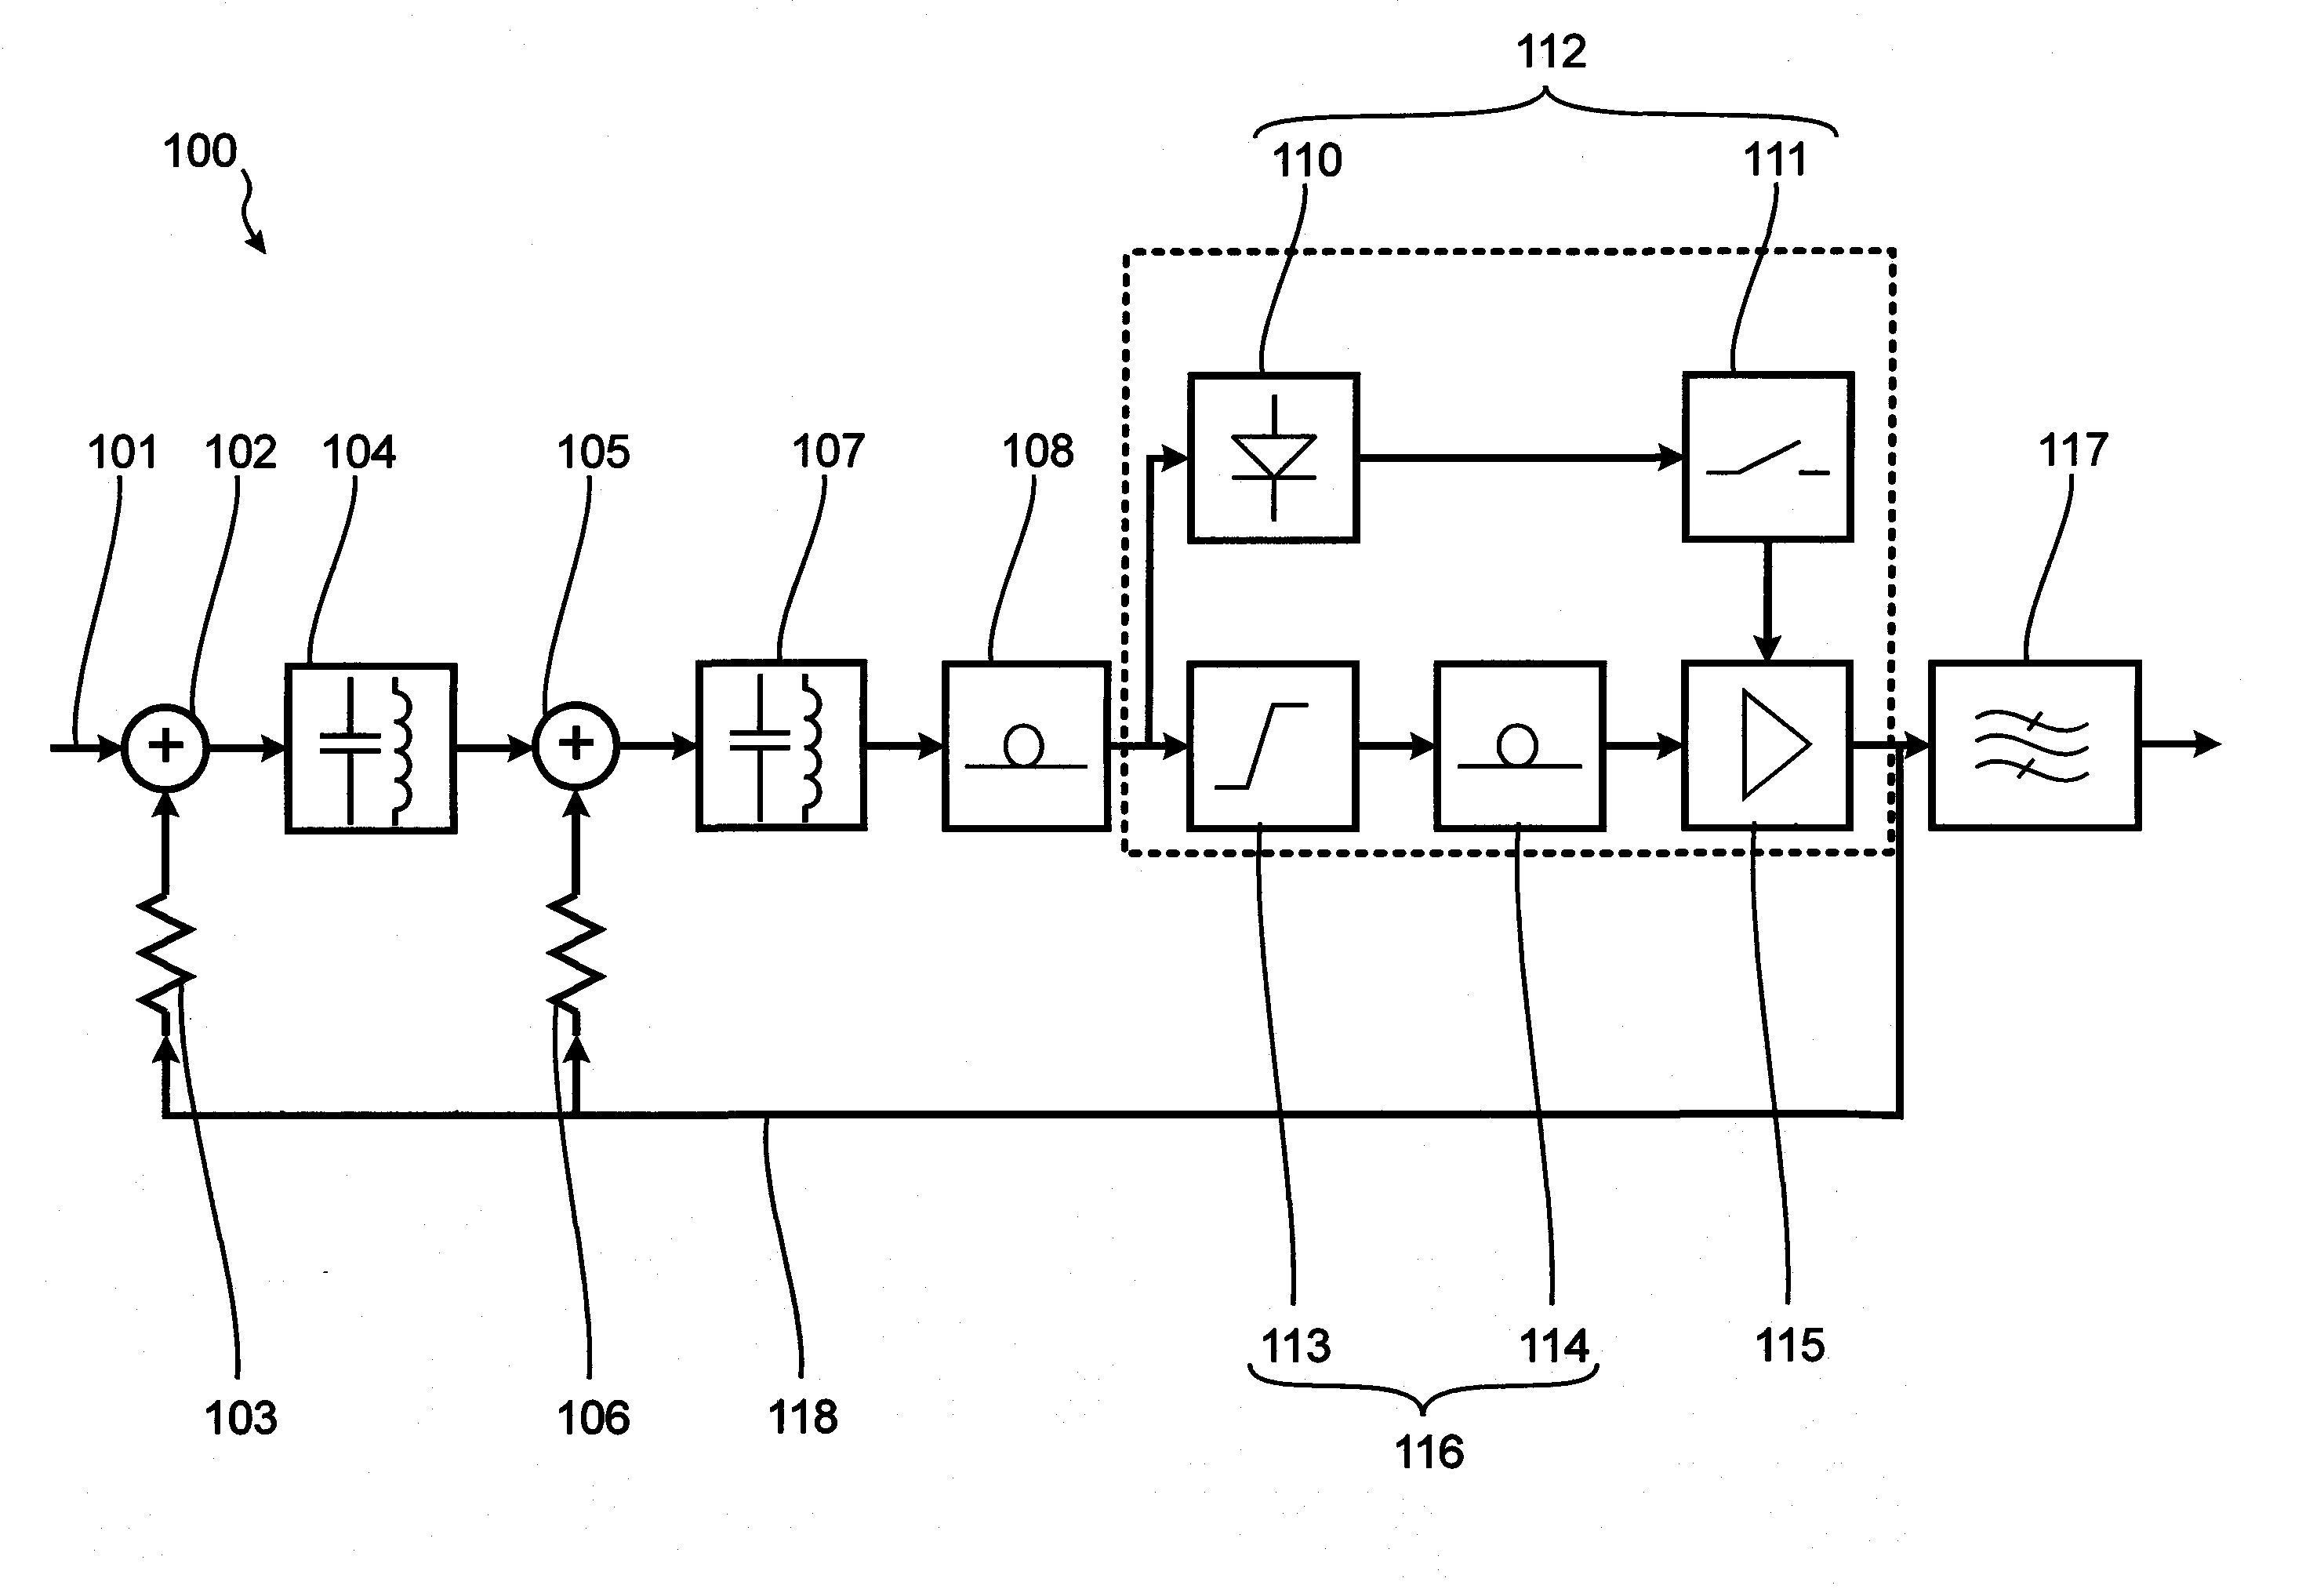 Asynchronous delta-sigma modulator and a method for the delta-sigma modulation of an input signal